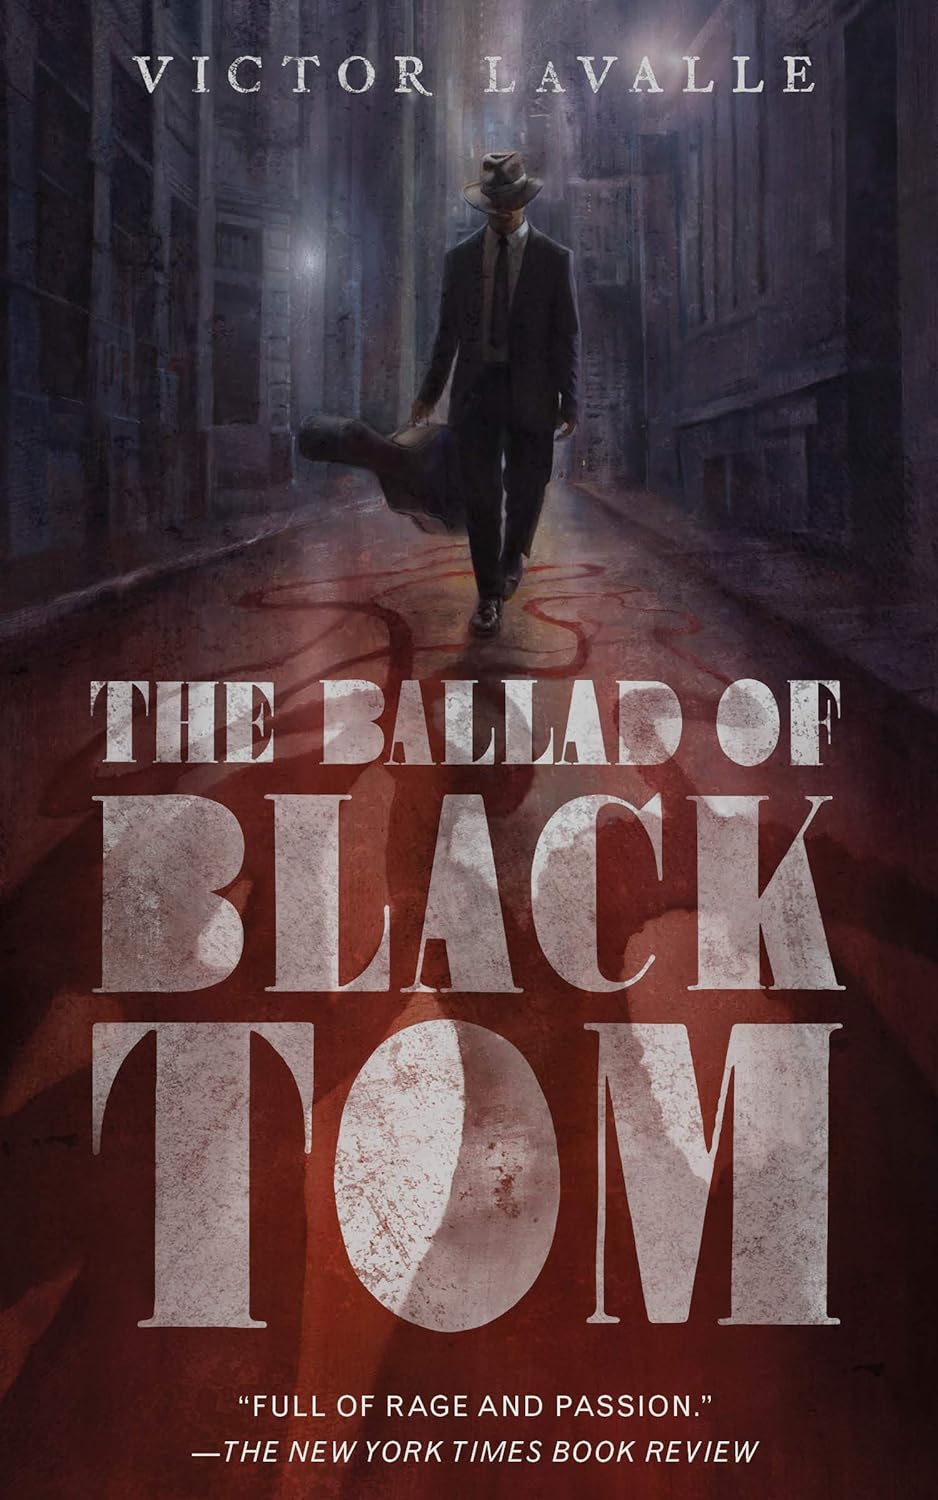 Tordotcom The Ballad of Black Tom, by Victor LaValle